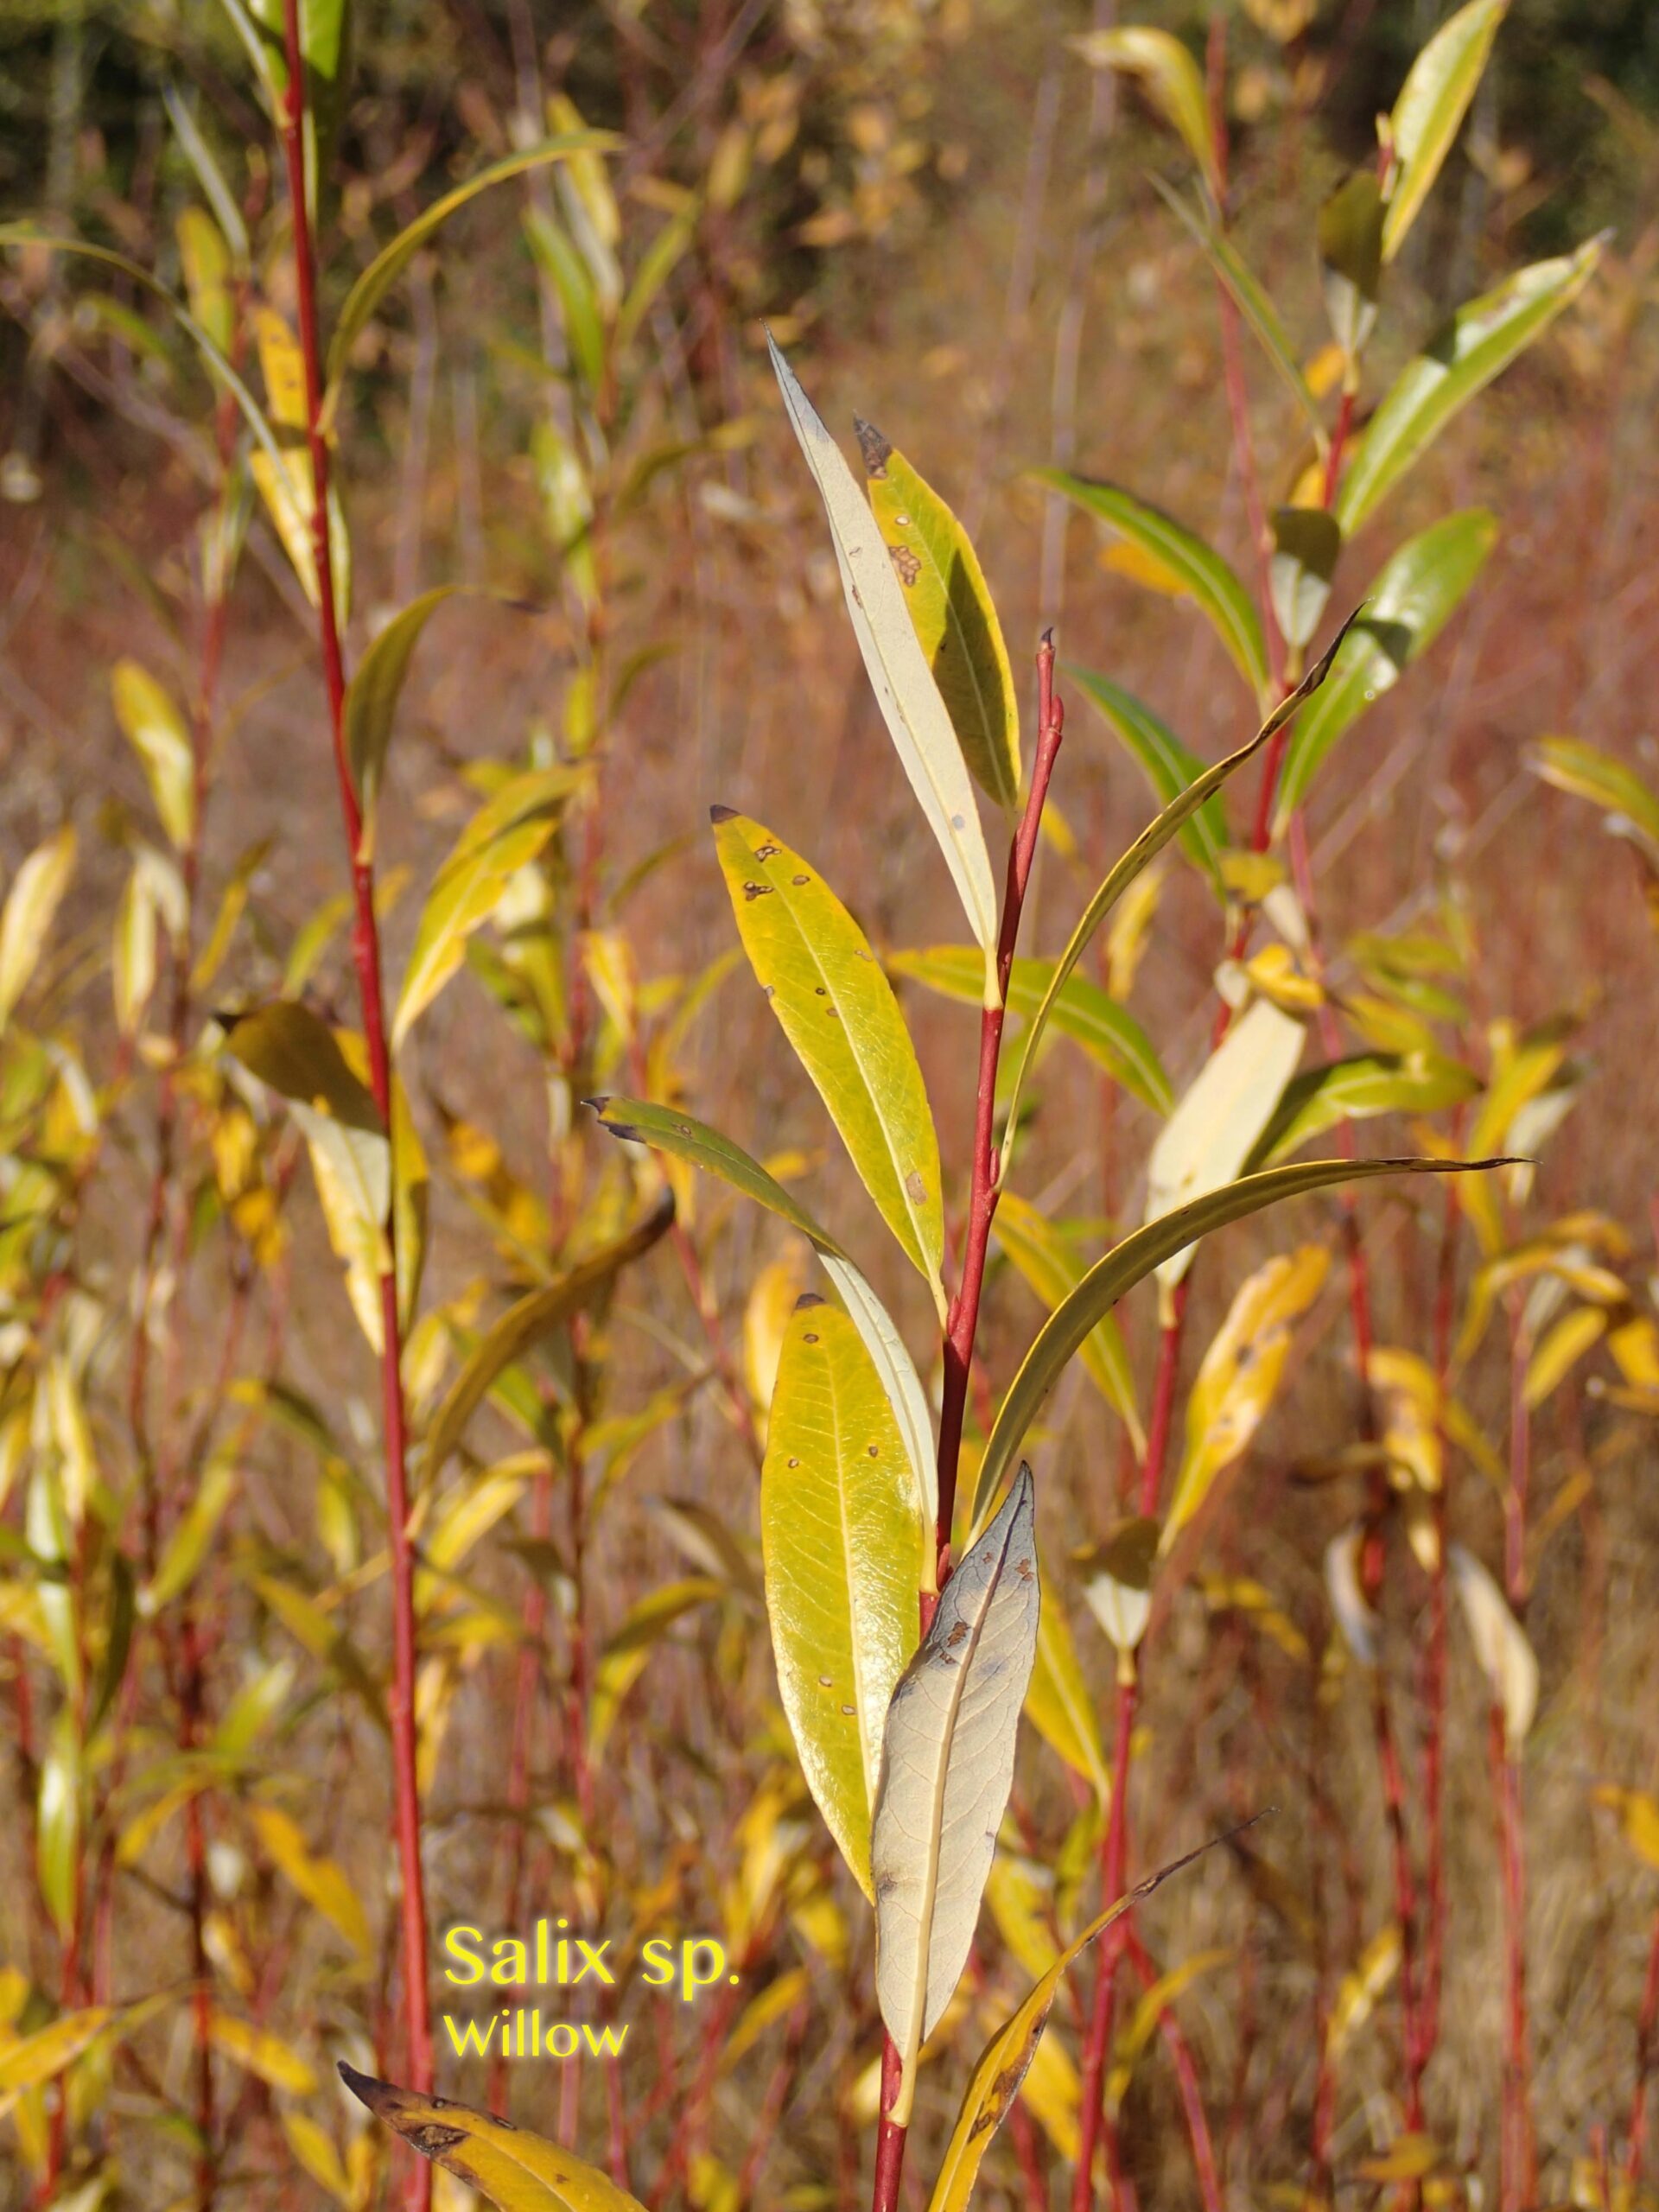 Color photo of willow in the fall, looking golden on a clear day. The stems are reddish.